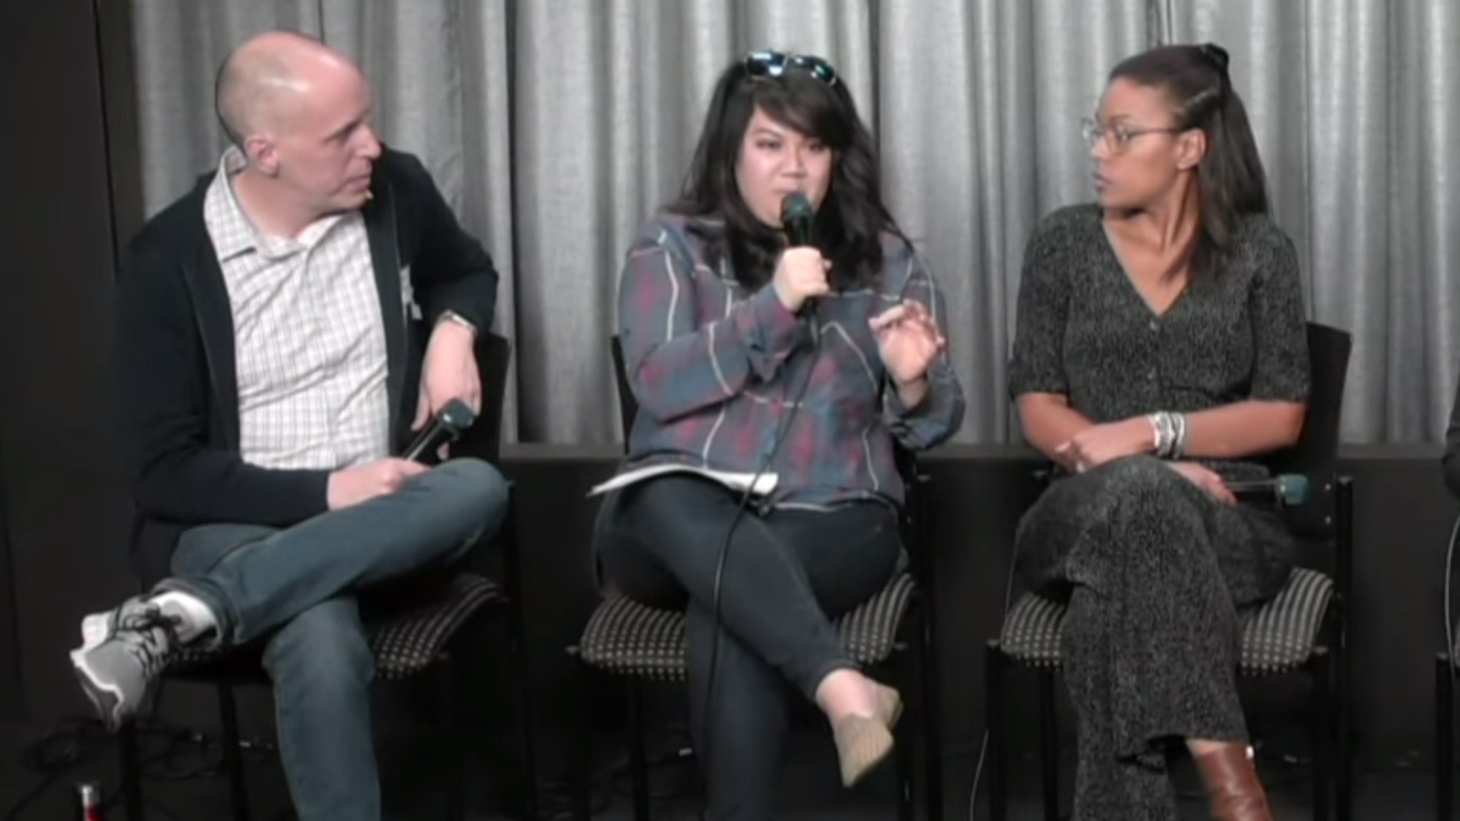 Three people sitting and speaking out of a microphone